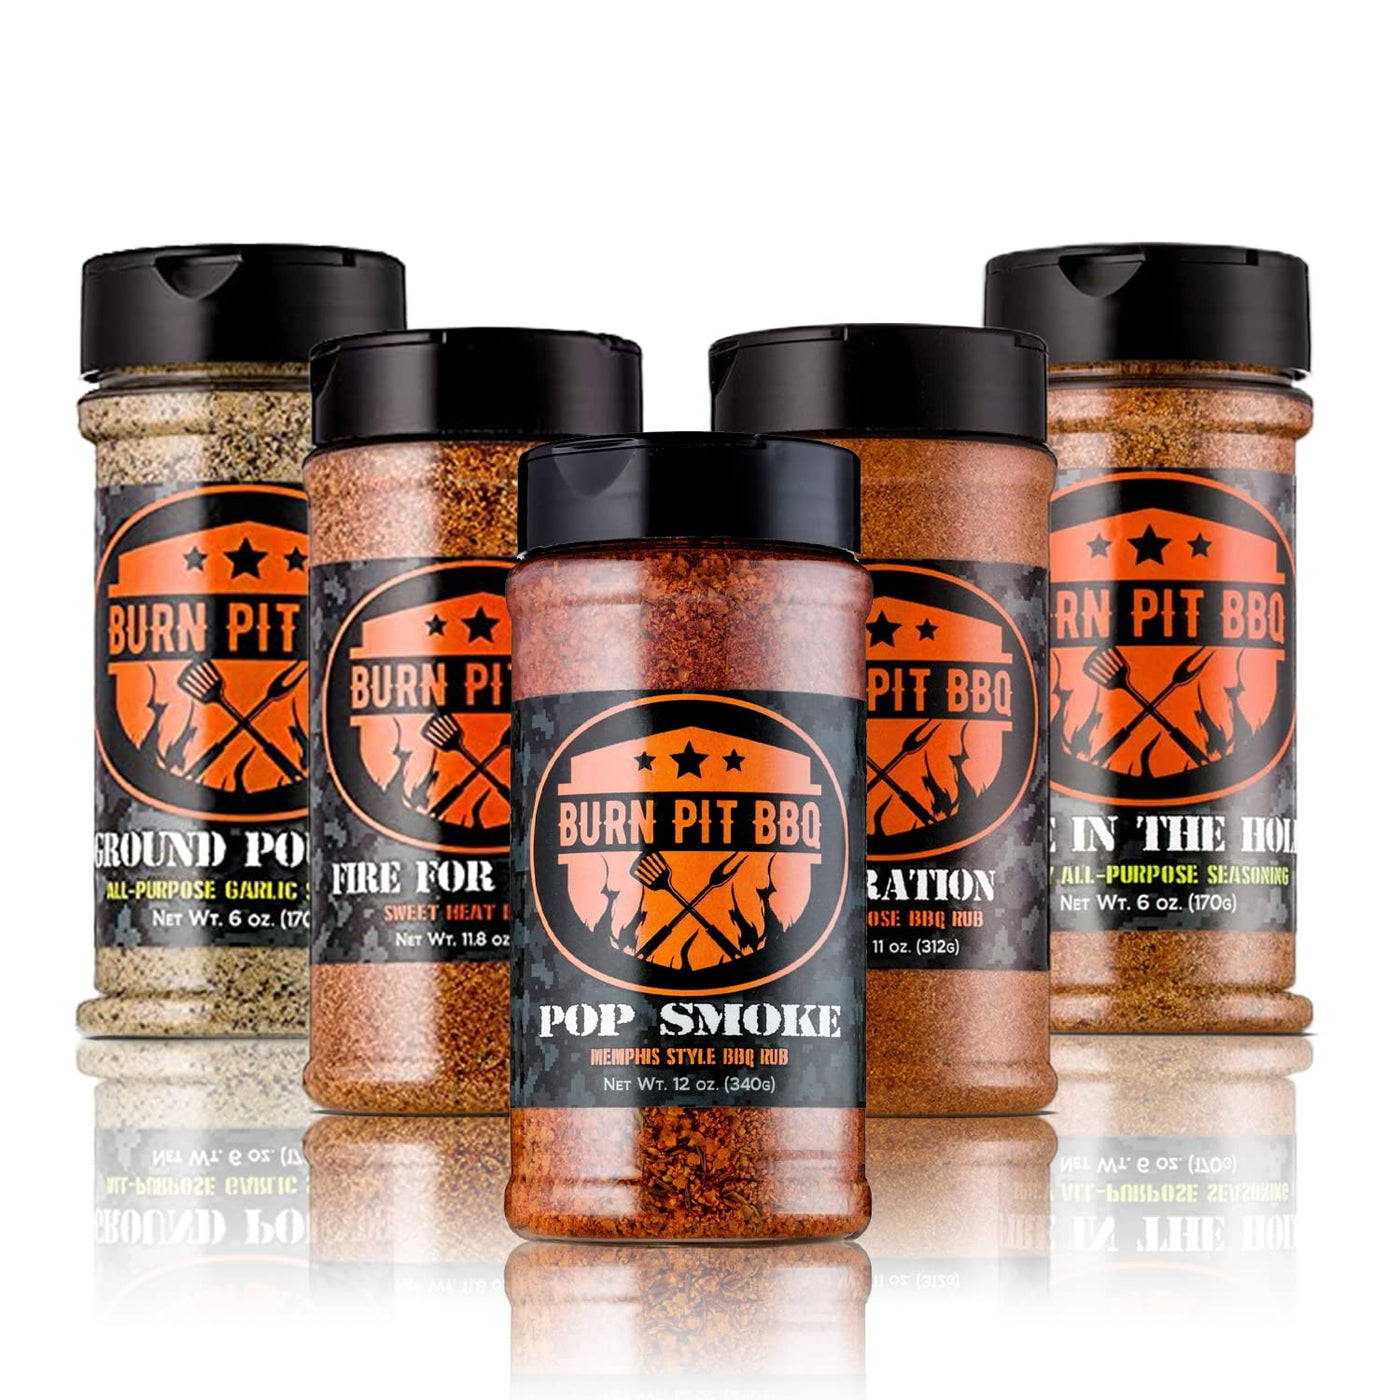 Rubs & Seasonings Gift 5-Pack - Burn Pit BBQ's Top Selling Rubs & Seasonings In One Box - Great For Gifts Or For Yourself